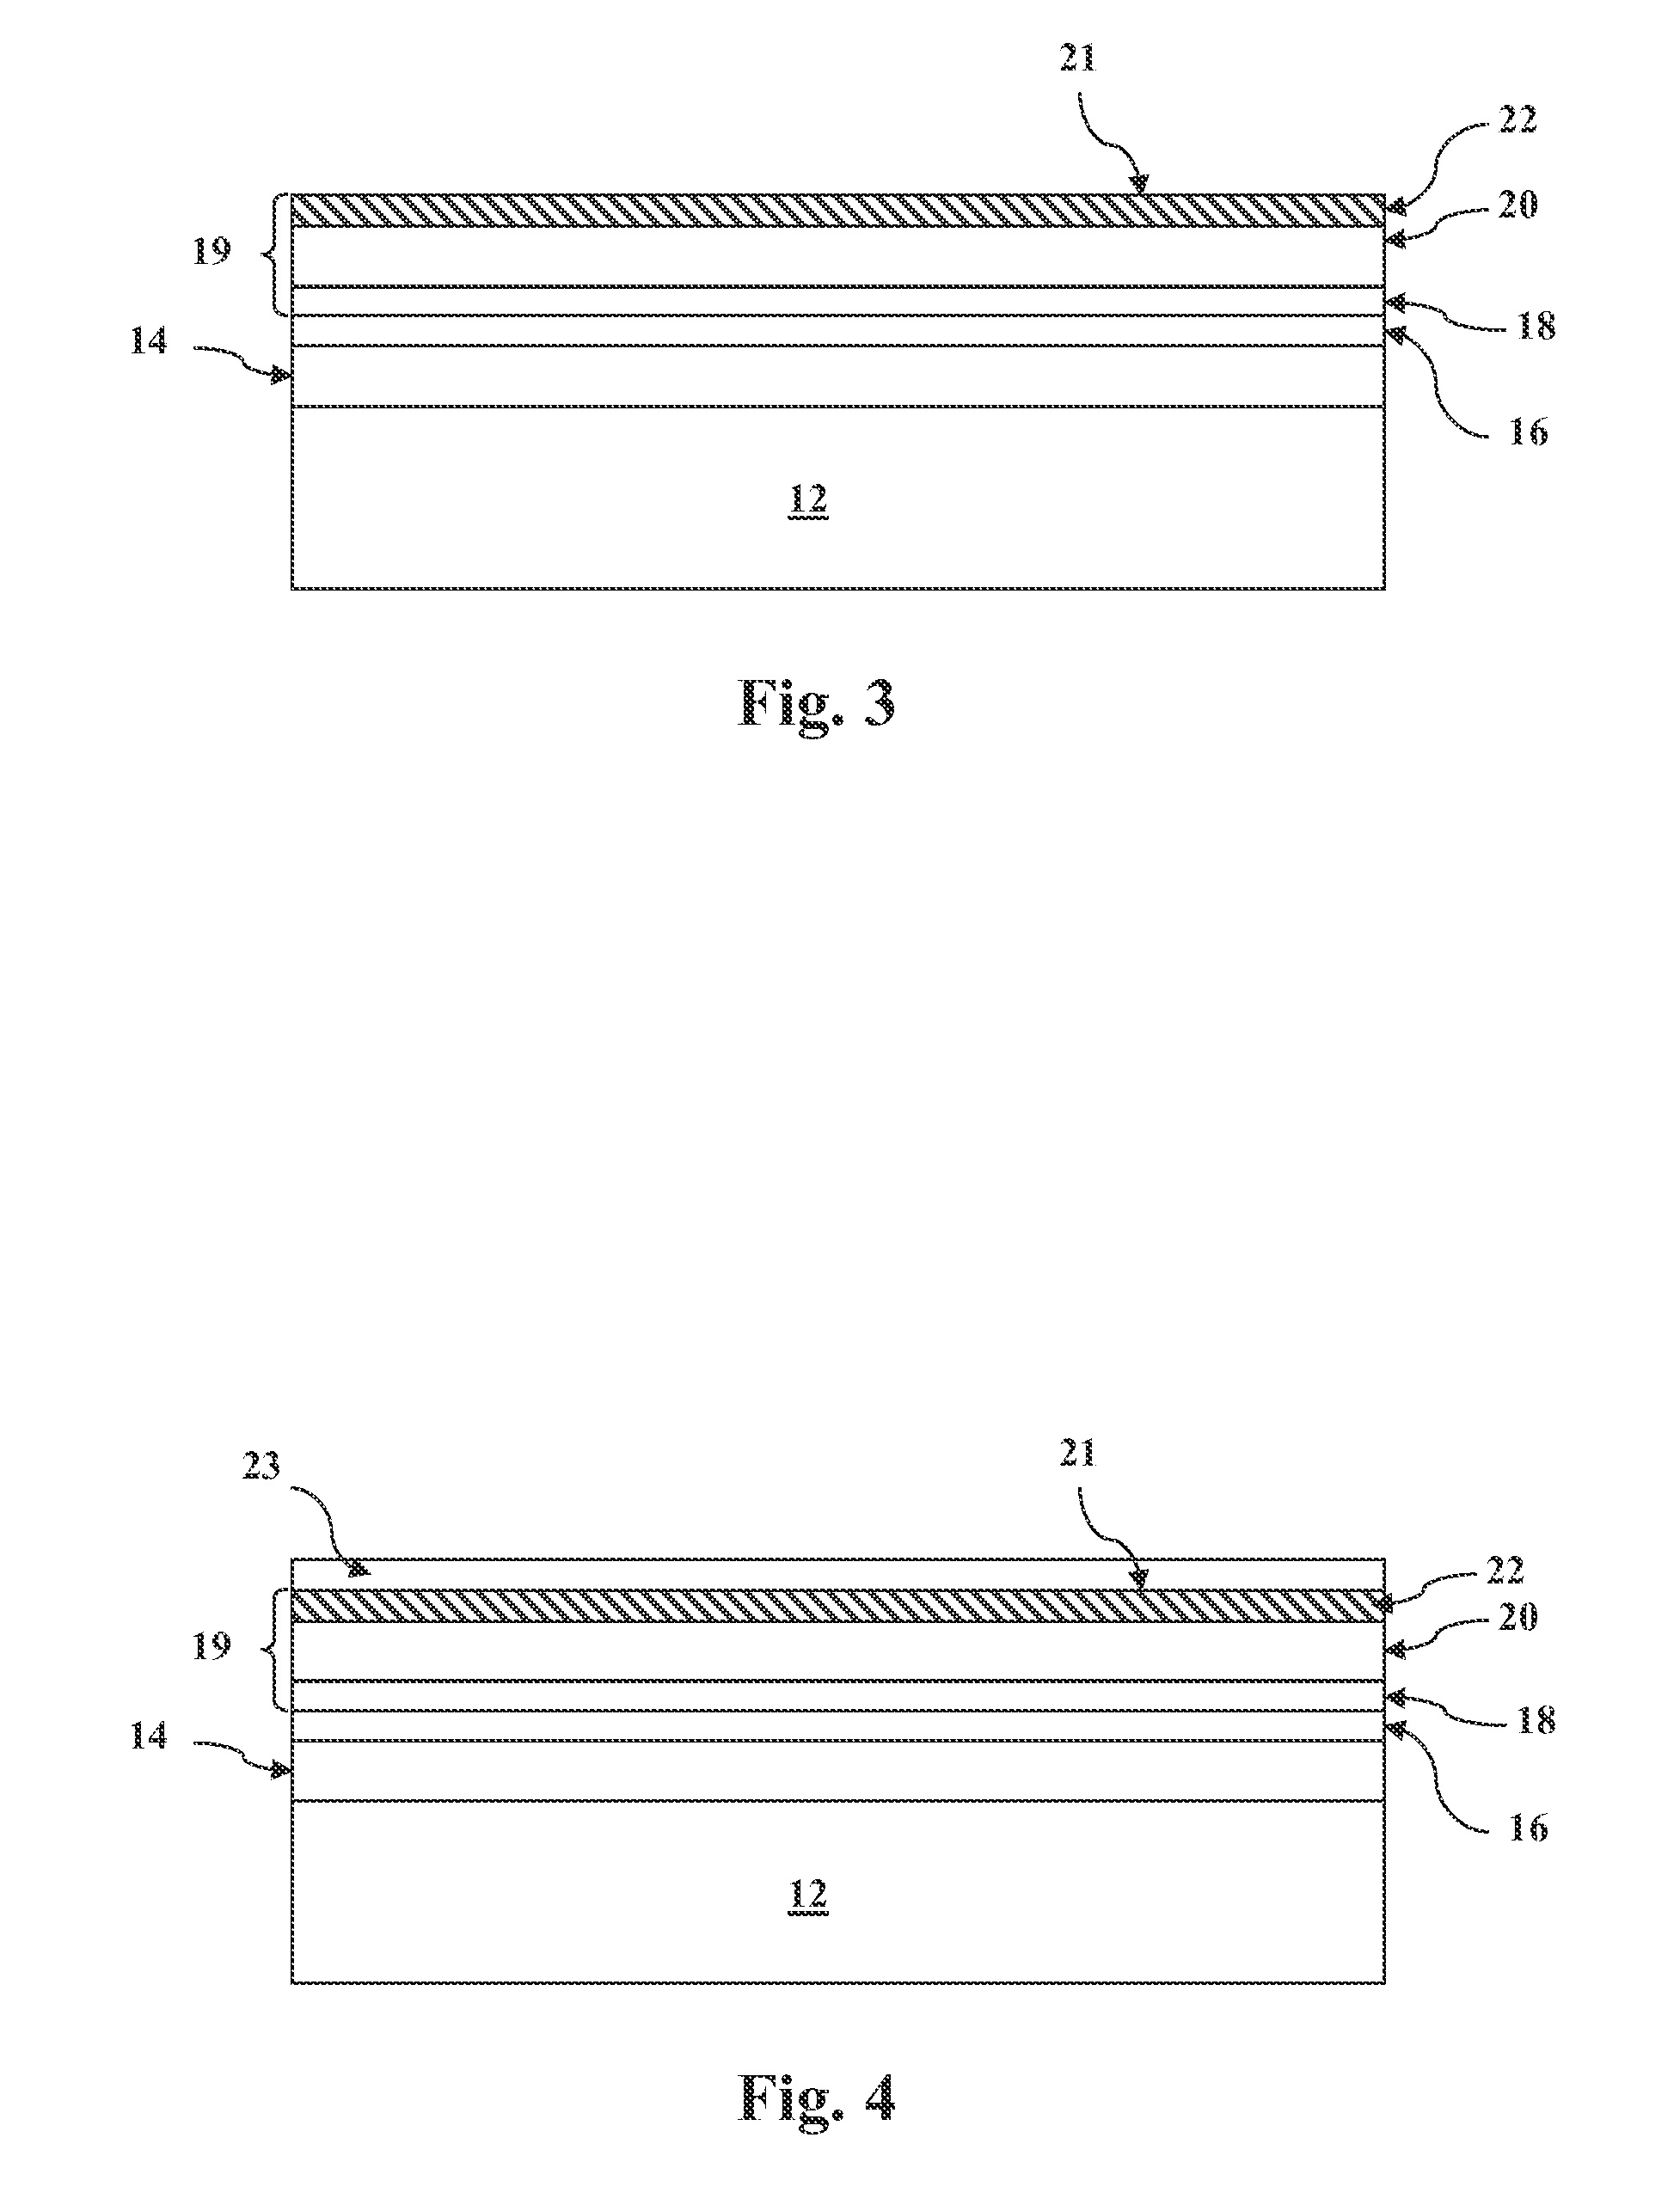 METHOD OF CONTROLLING THE AMOUNT OF Cu DOPING WHEN FORMING A BACK CONTACT OF A PHOTOVOLTAIC CELL